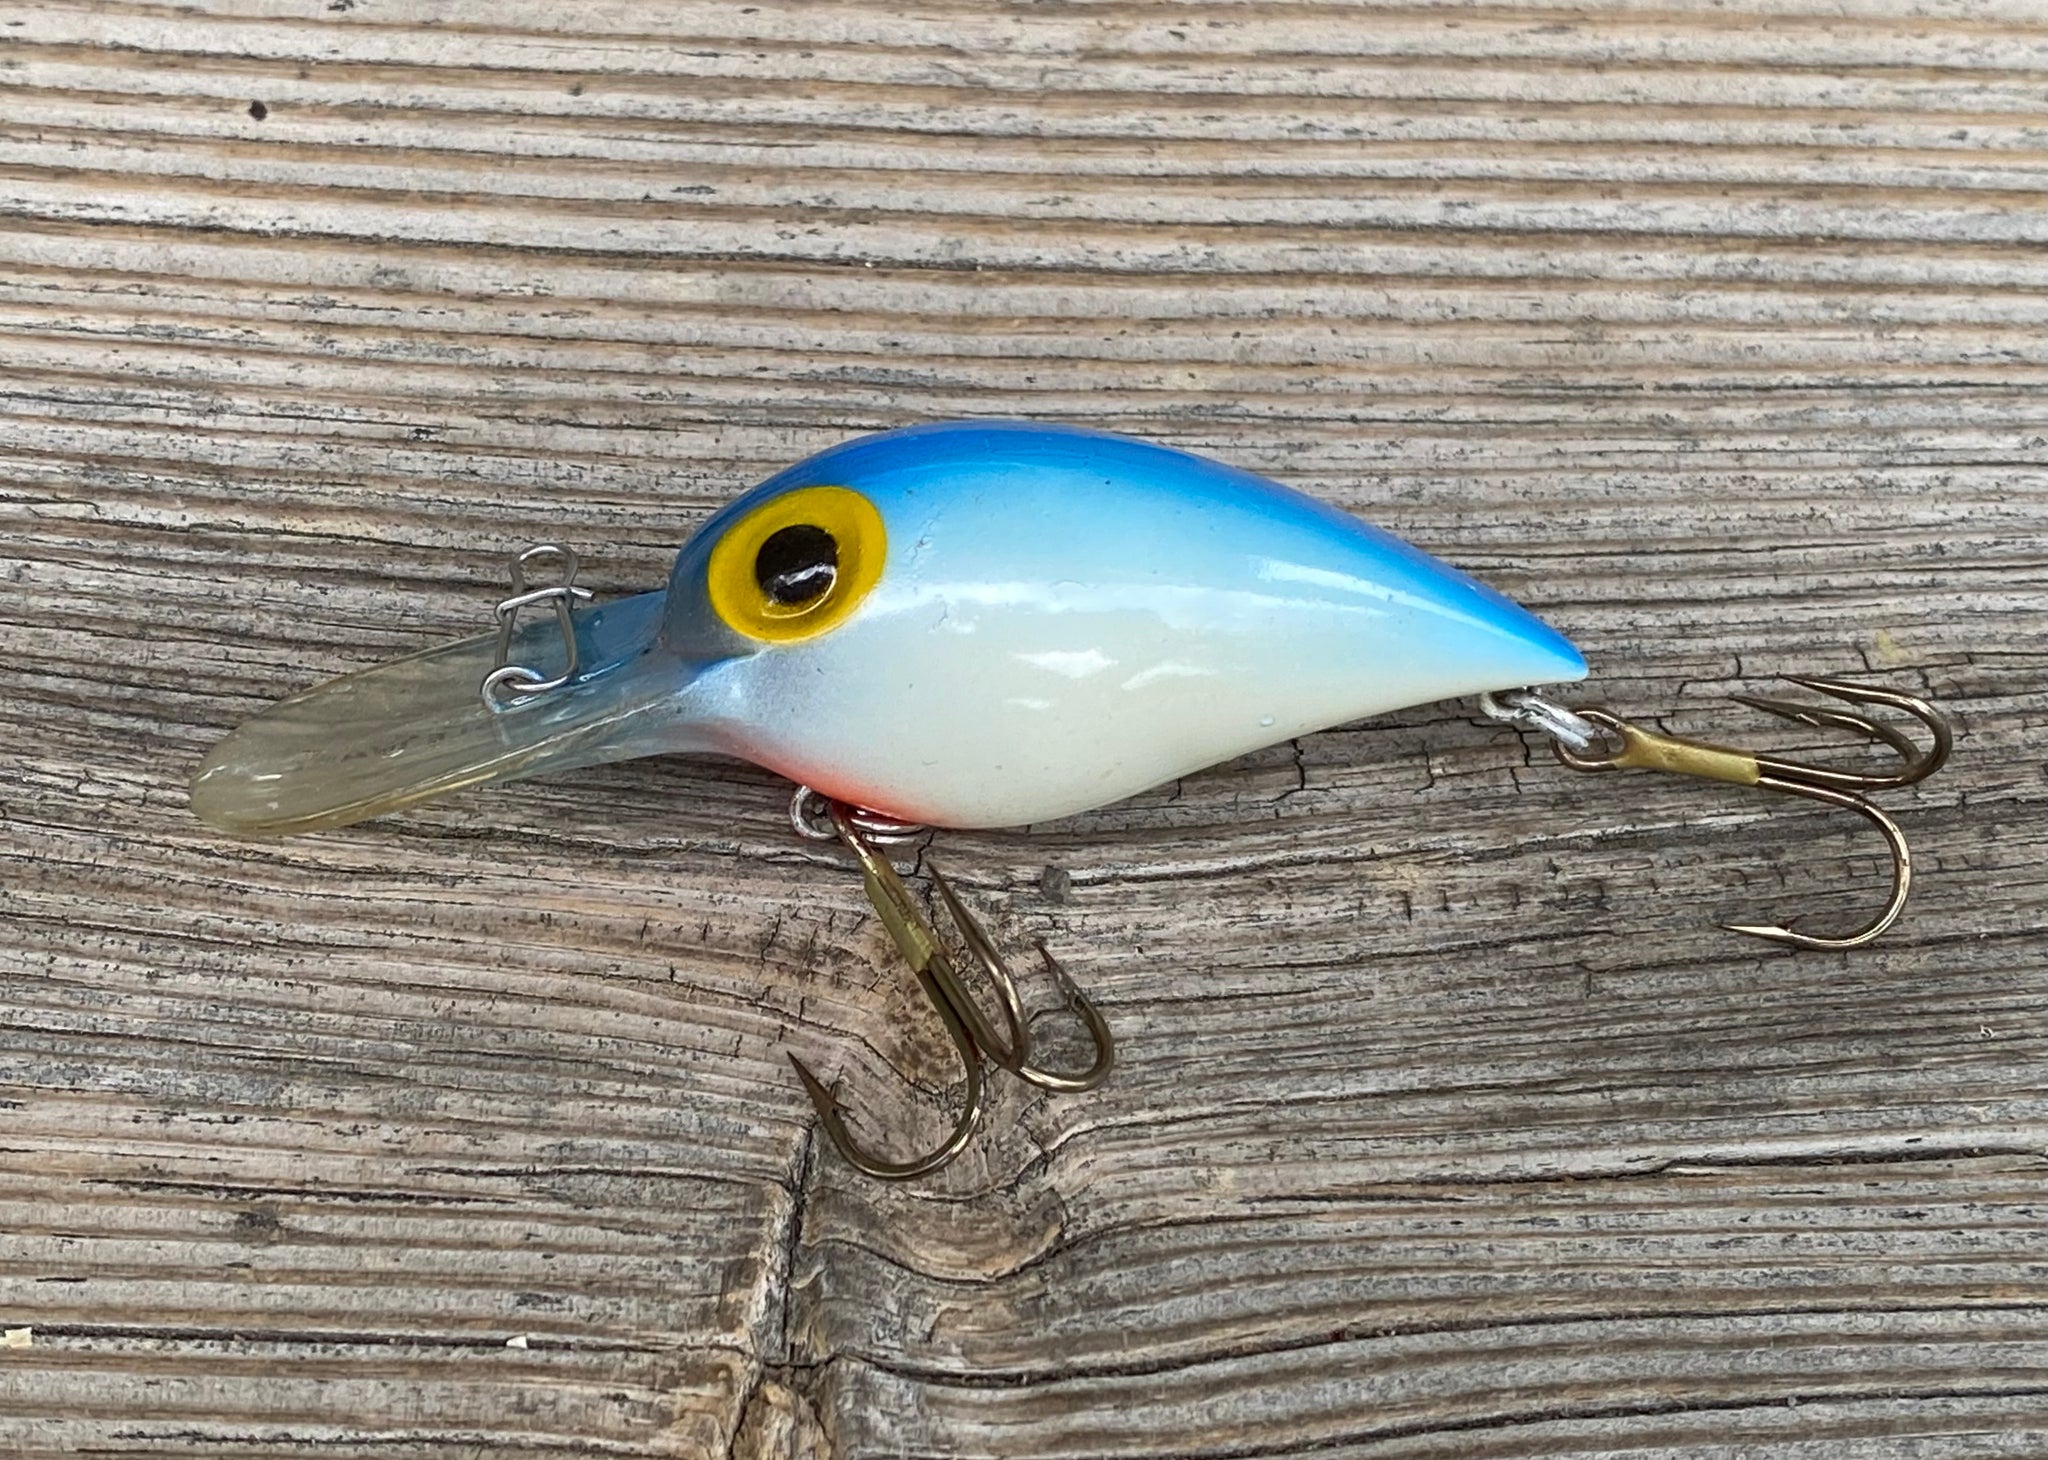 STORM V88 Wiggle Wart Fishing Lure — PEARL/BLUE BACK/RED – Toad Tackle